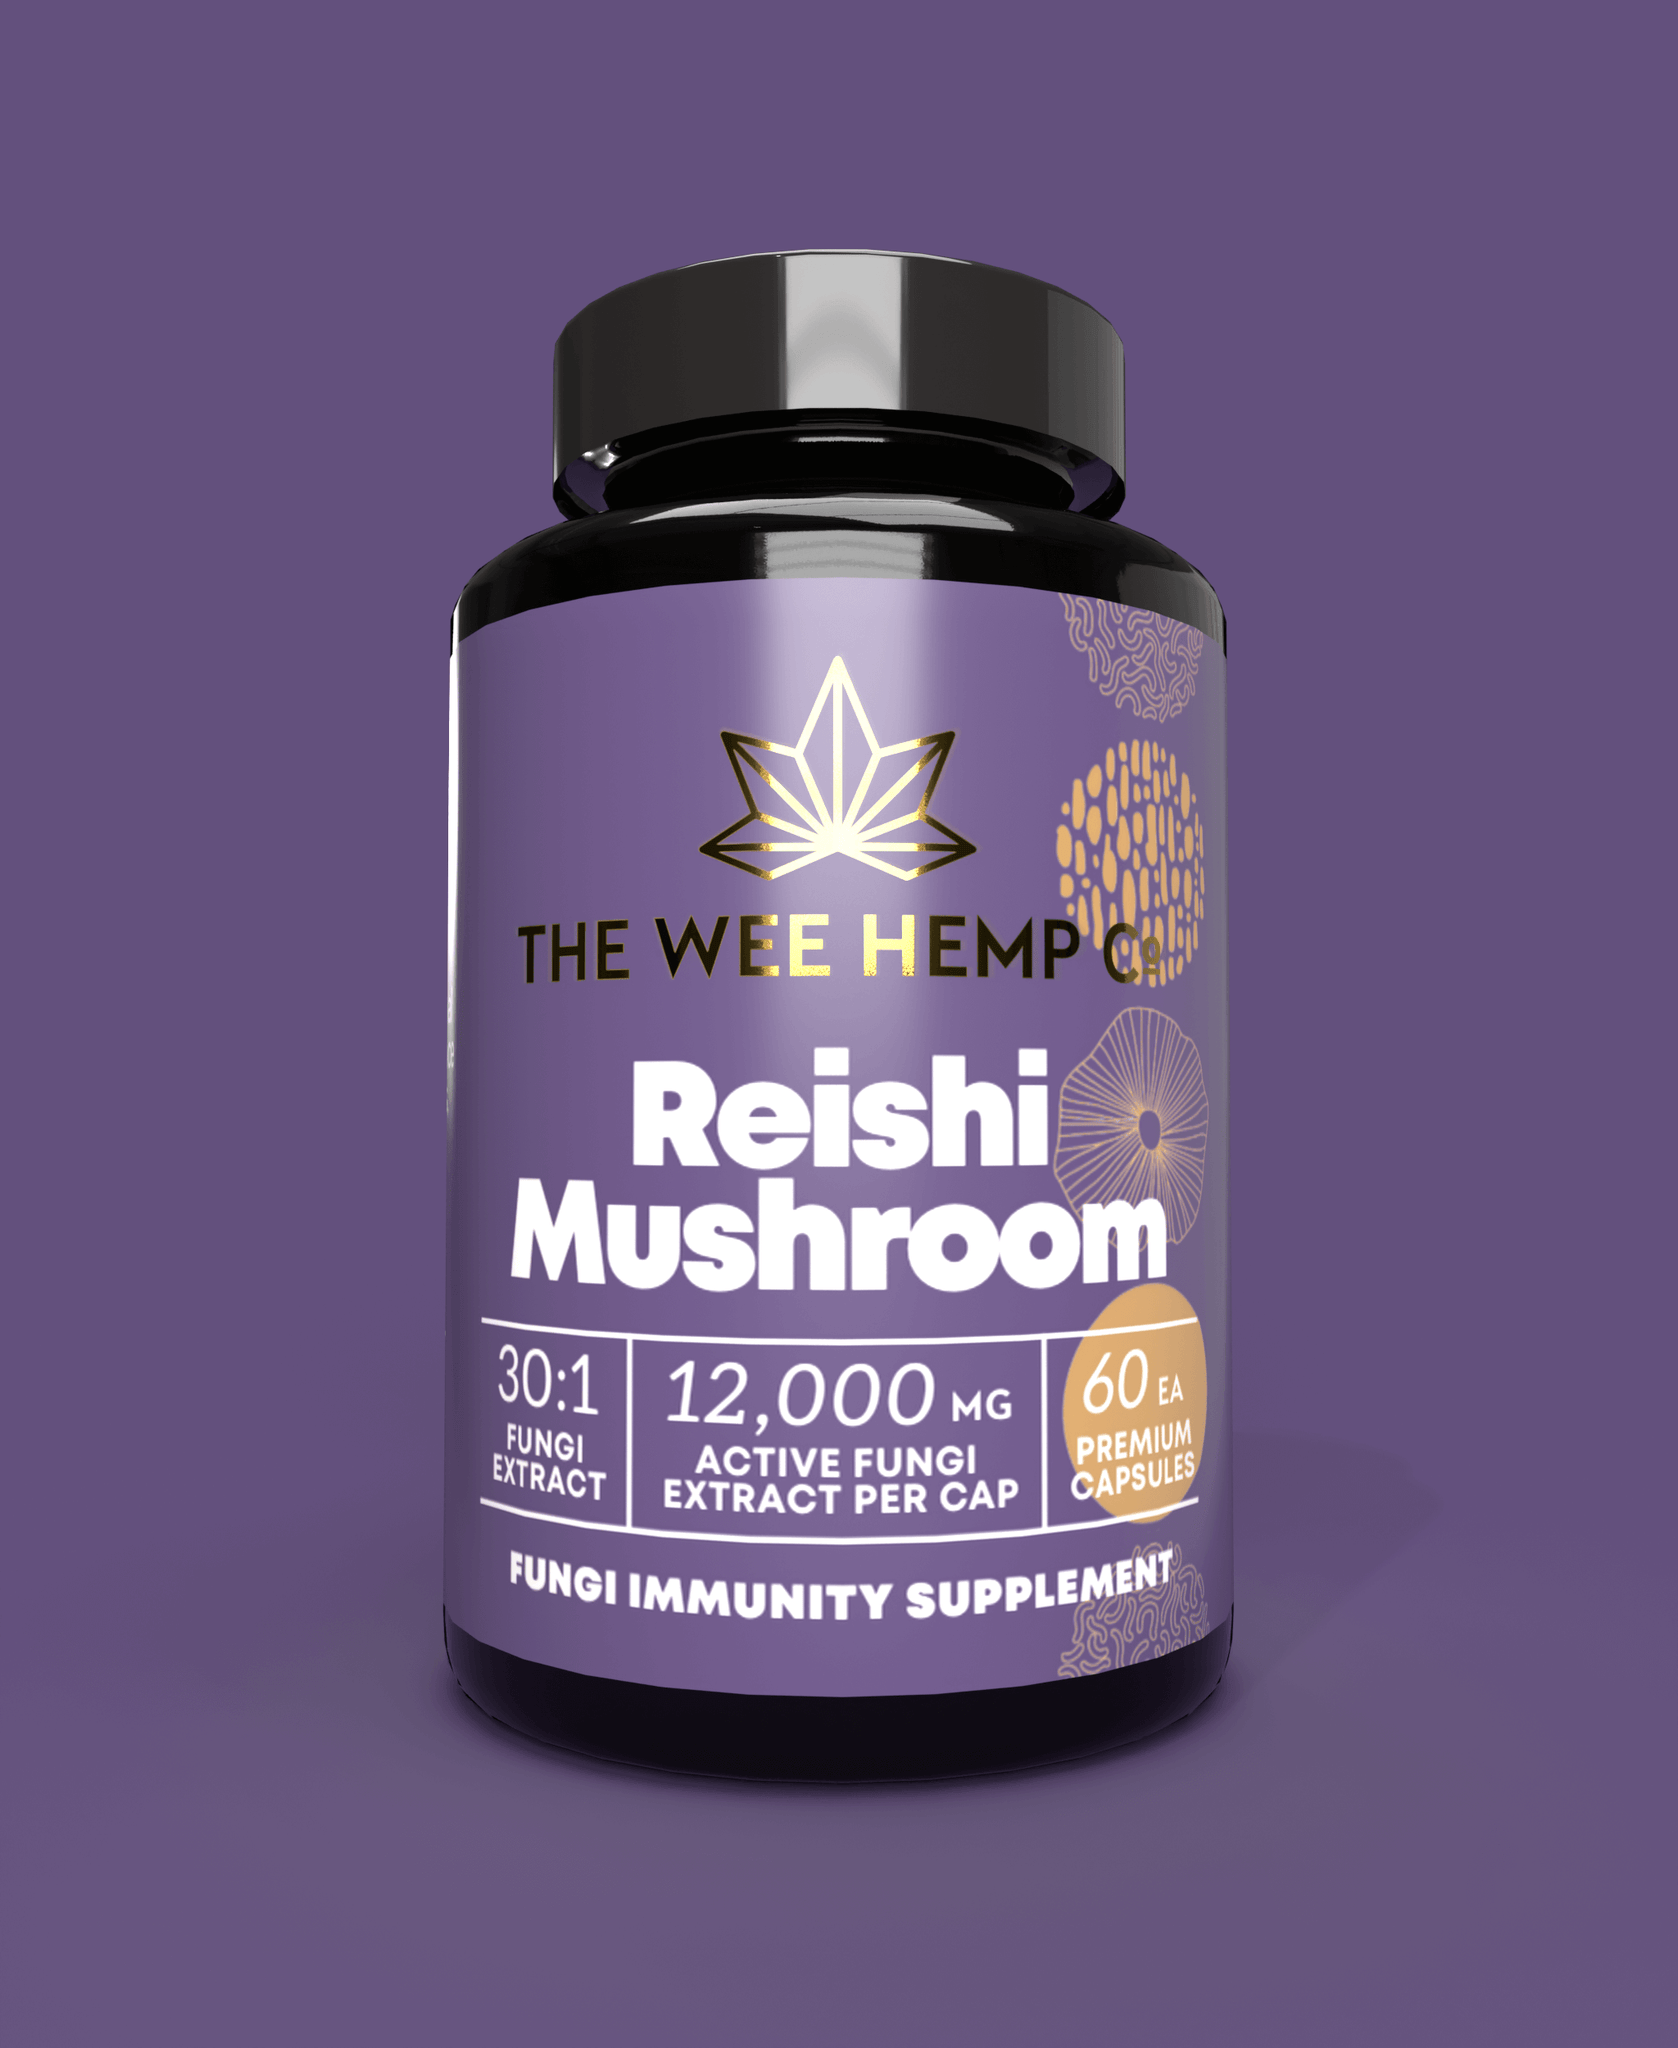 Reishi Mushroom Clean Extract, No Bulking Agents. The Wee Hemp Company, Aberdeenshire, Scotland. Blue background with mushroom supplements in foreground. Scotland's Leading CBD Company.